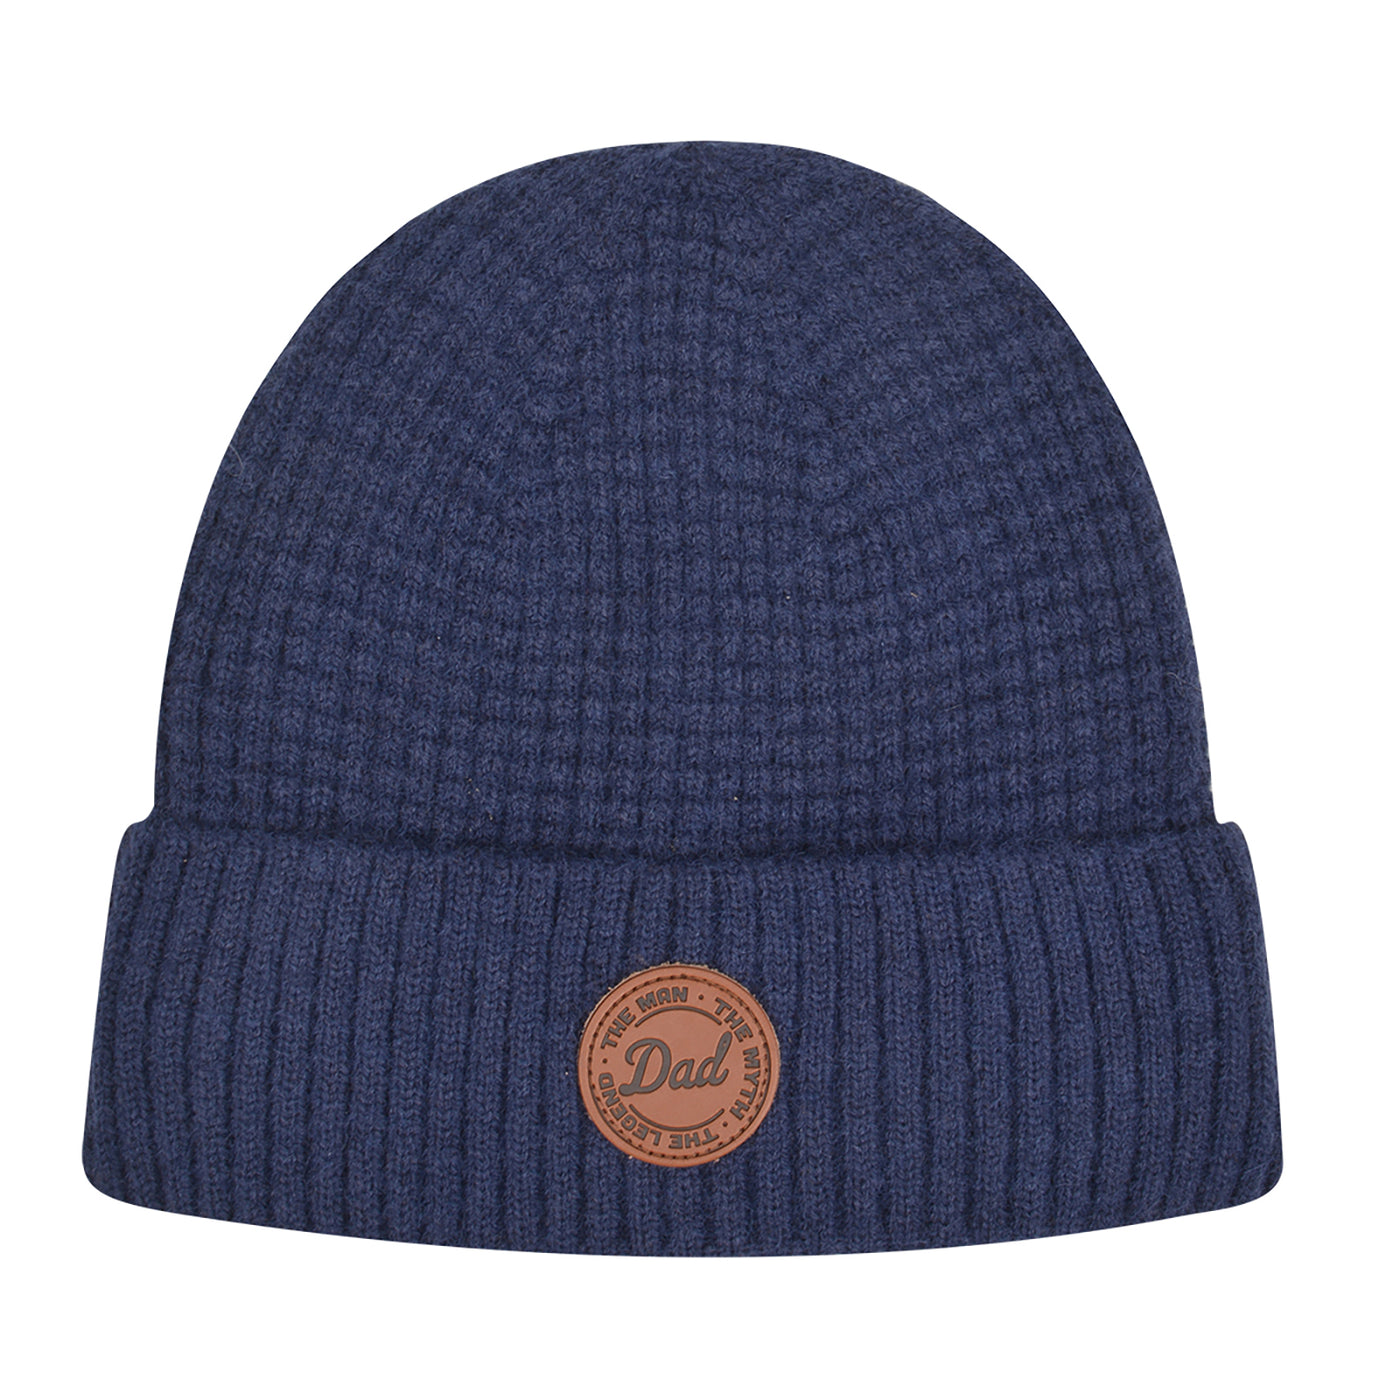 Hatphile Dad The Man The Myth The Legend Leather Patch Knit Beanie Toque